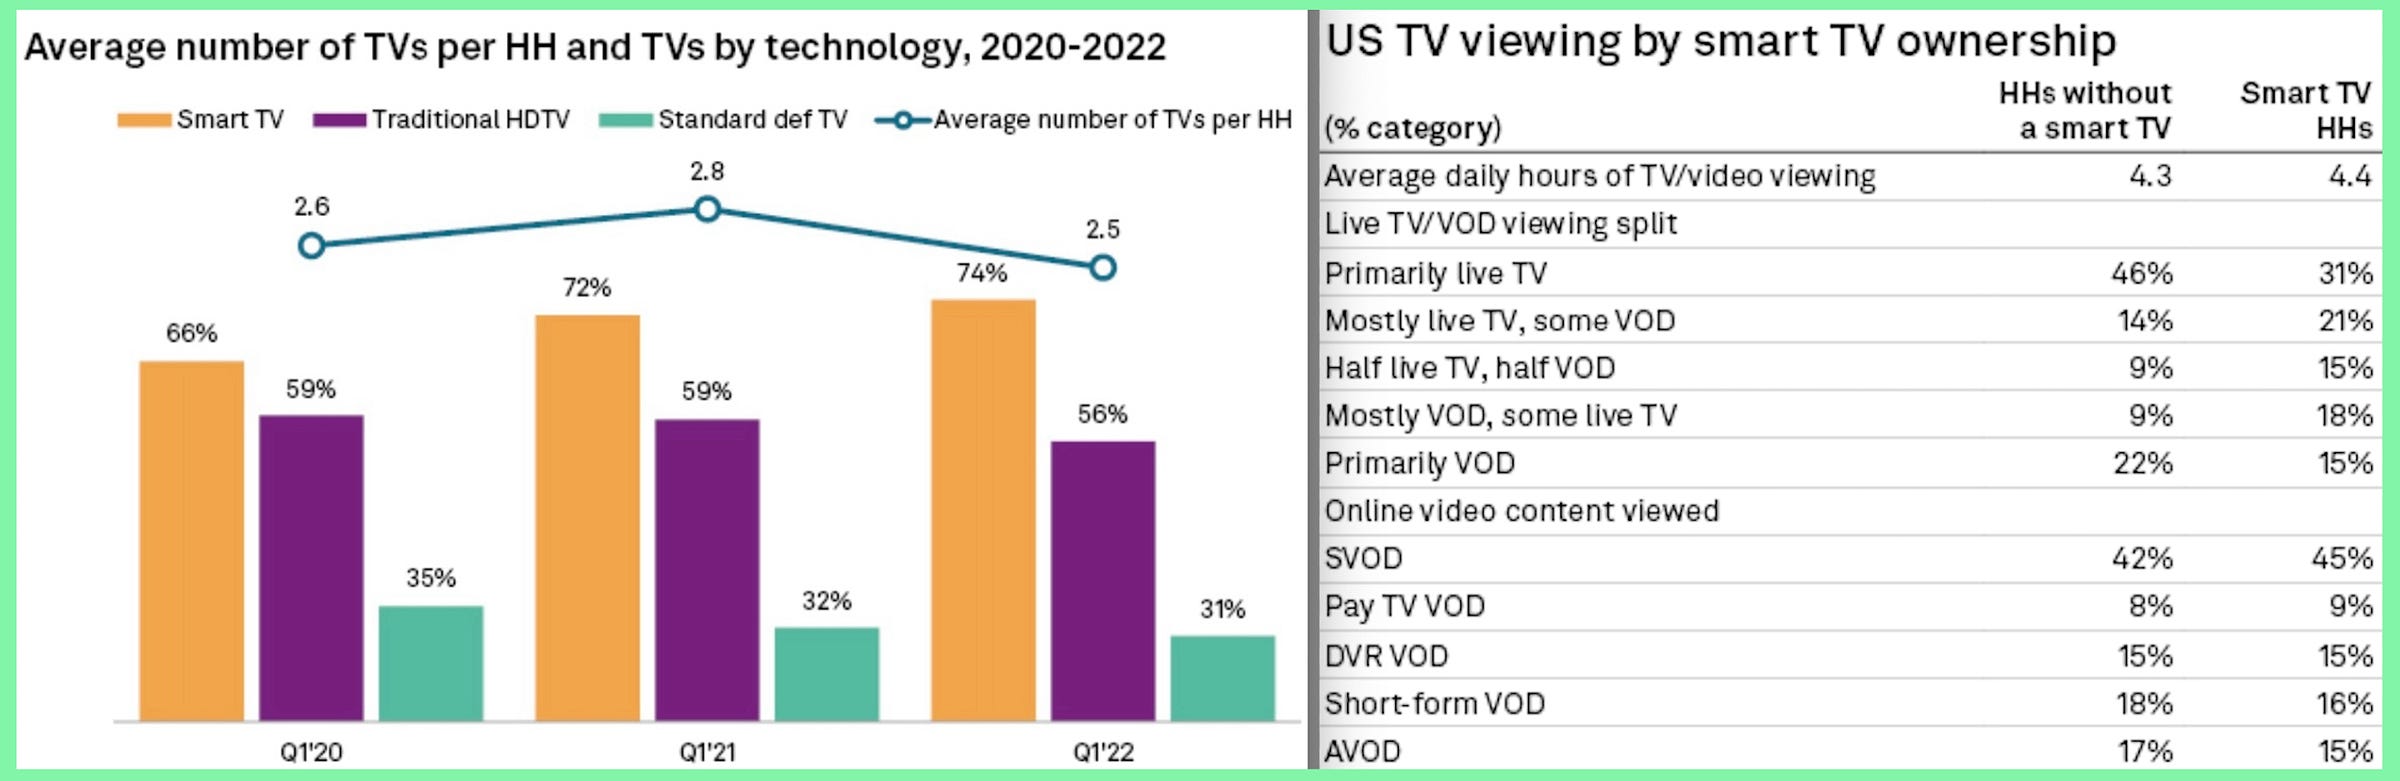 Smart TV owners consume slightly more online video than non-smart TV owners, but their other viewing behaviors are essentially the same. Source: S&P Global Intelligence